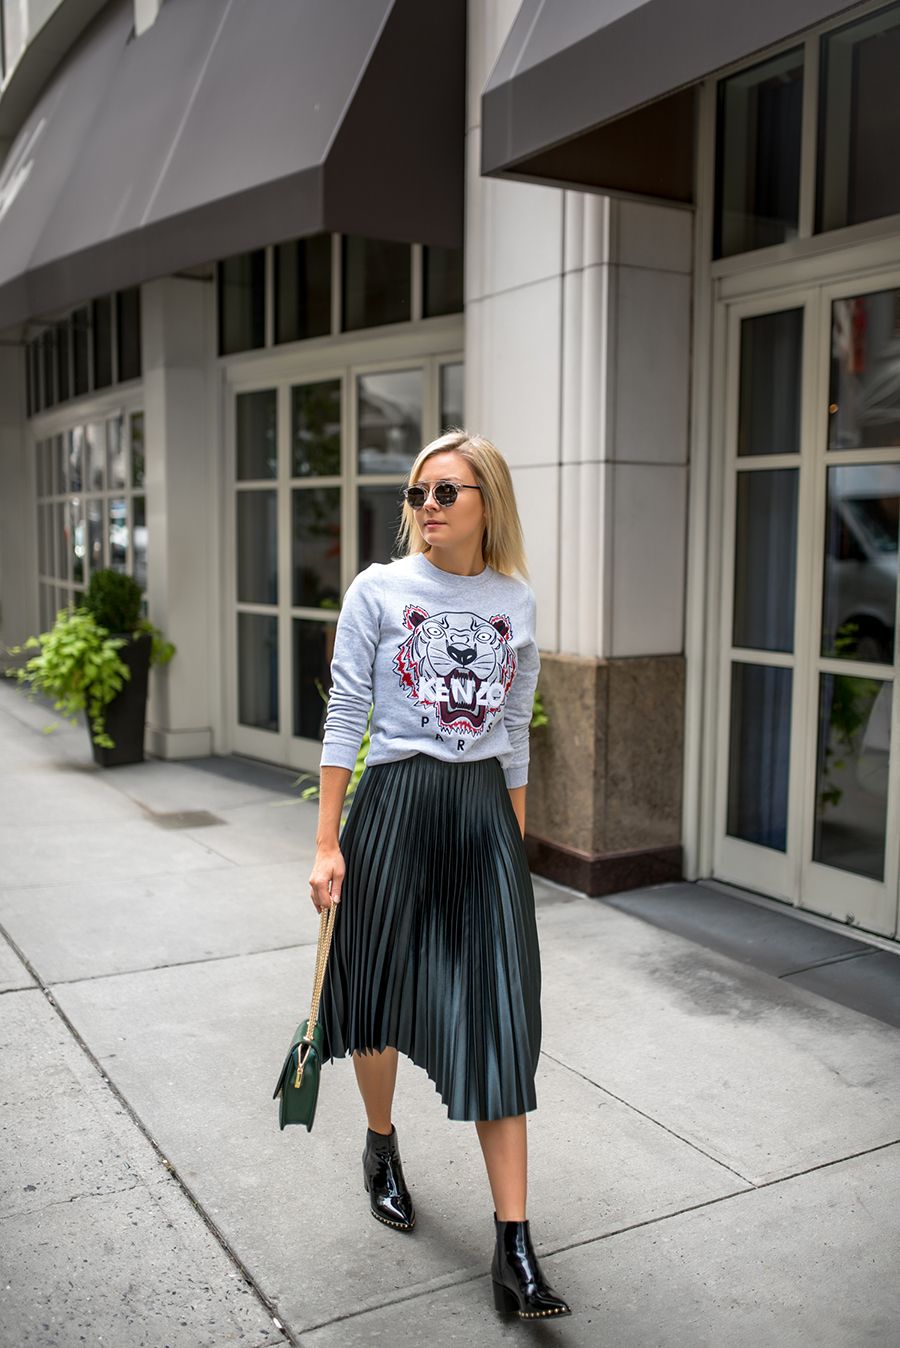 Street style 2017 fashion trends: pleated skirt